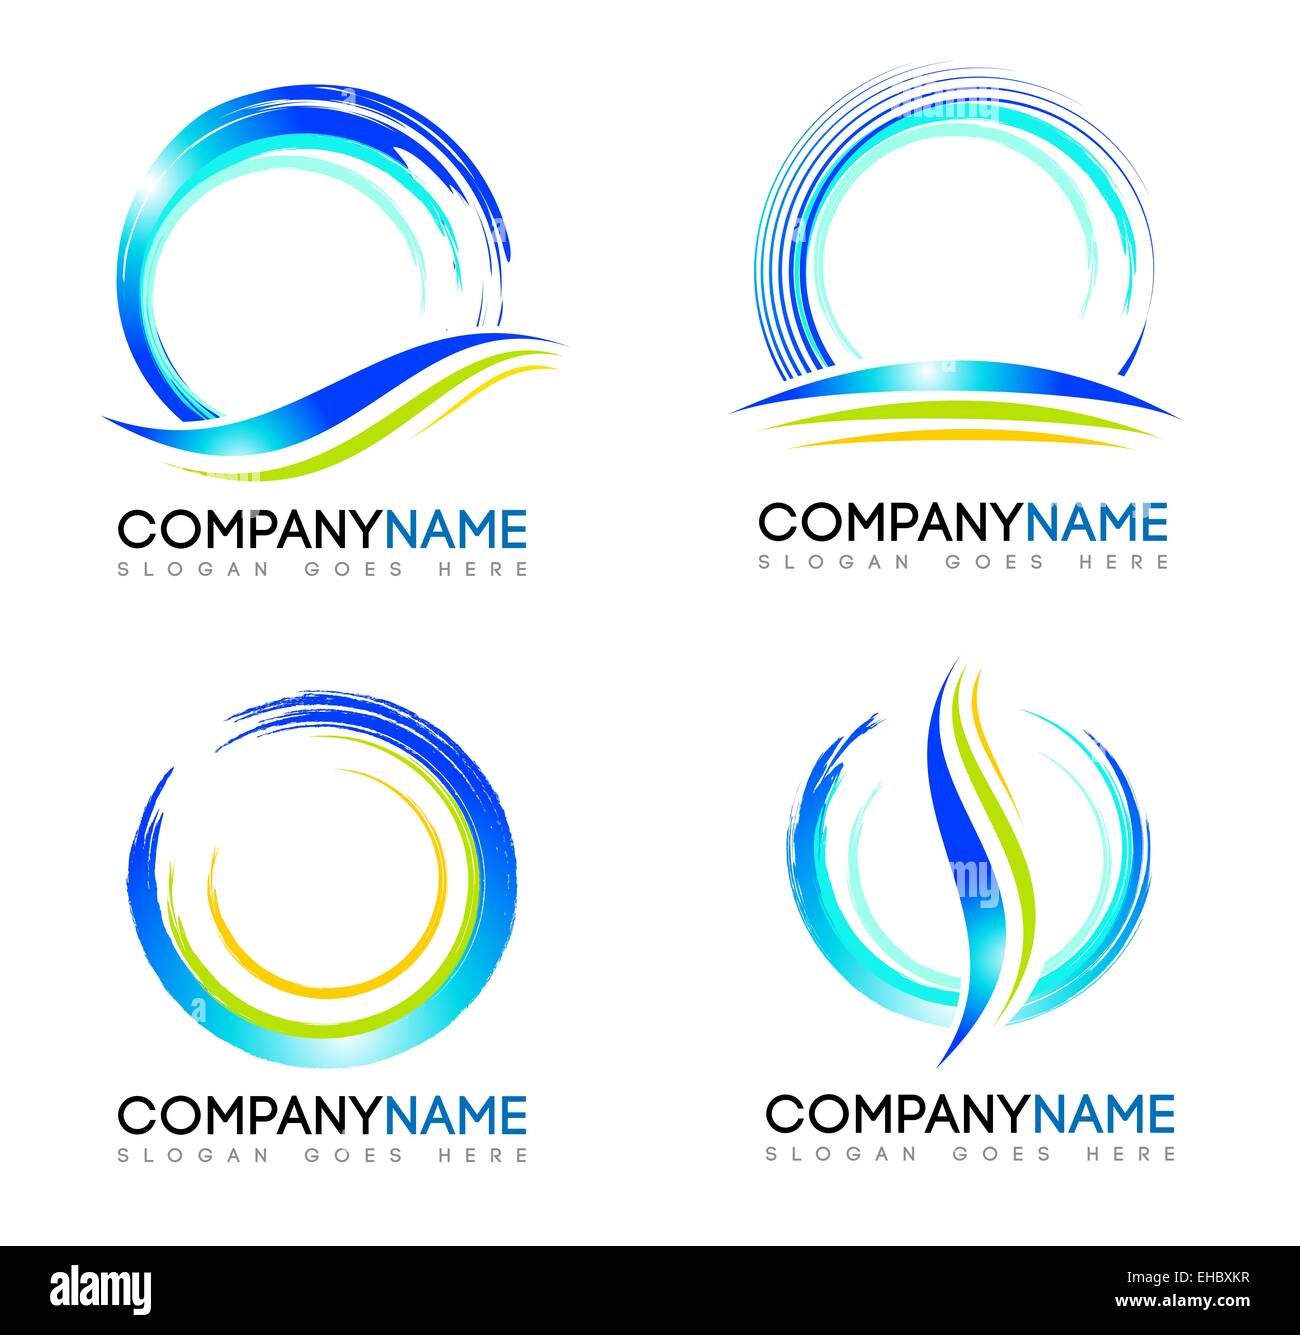 Water Splash Logo. Vector design logos with water splash concepts and swashes. Stock Photo